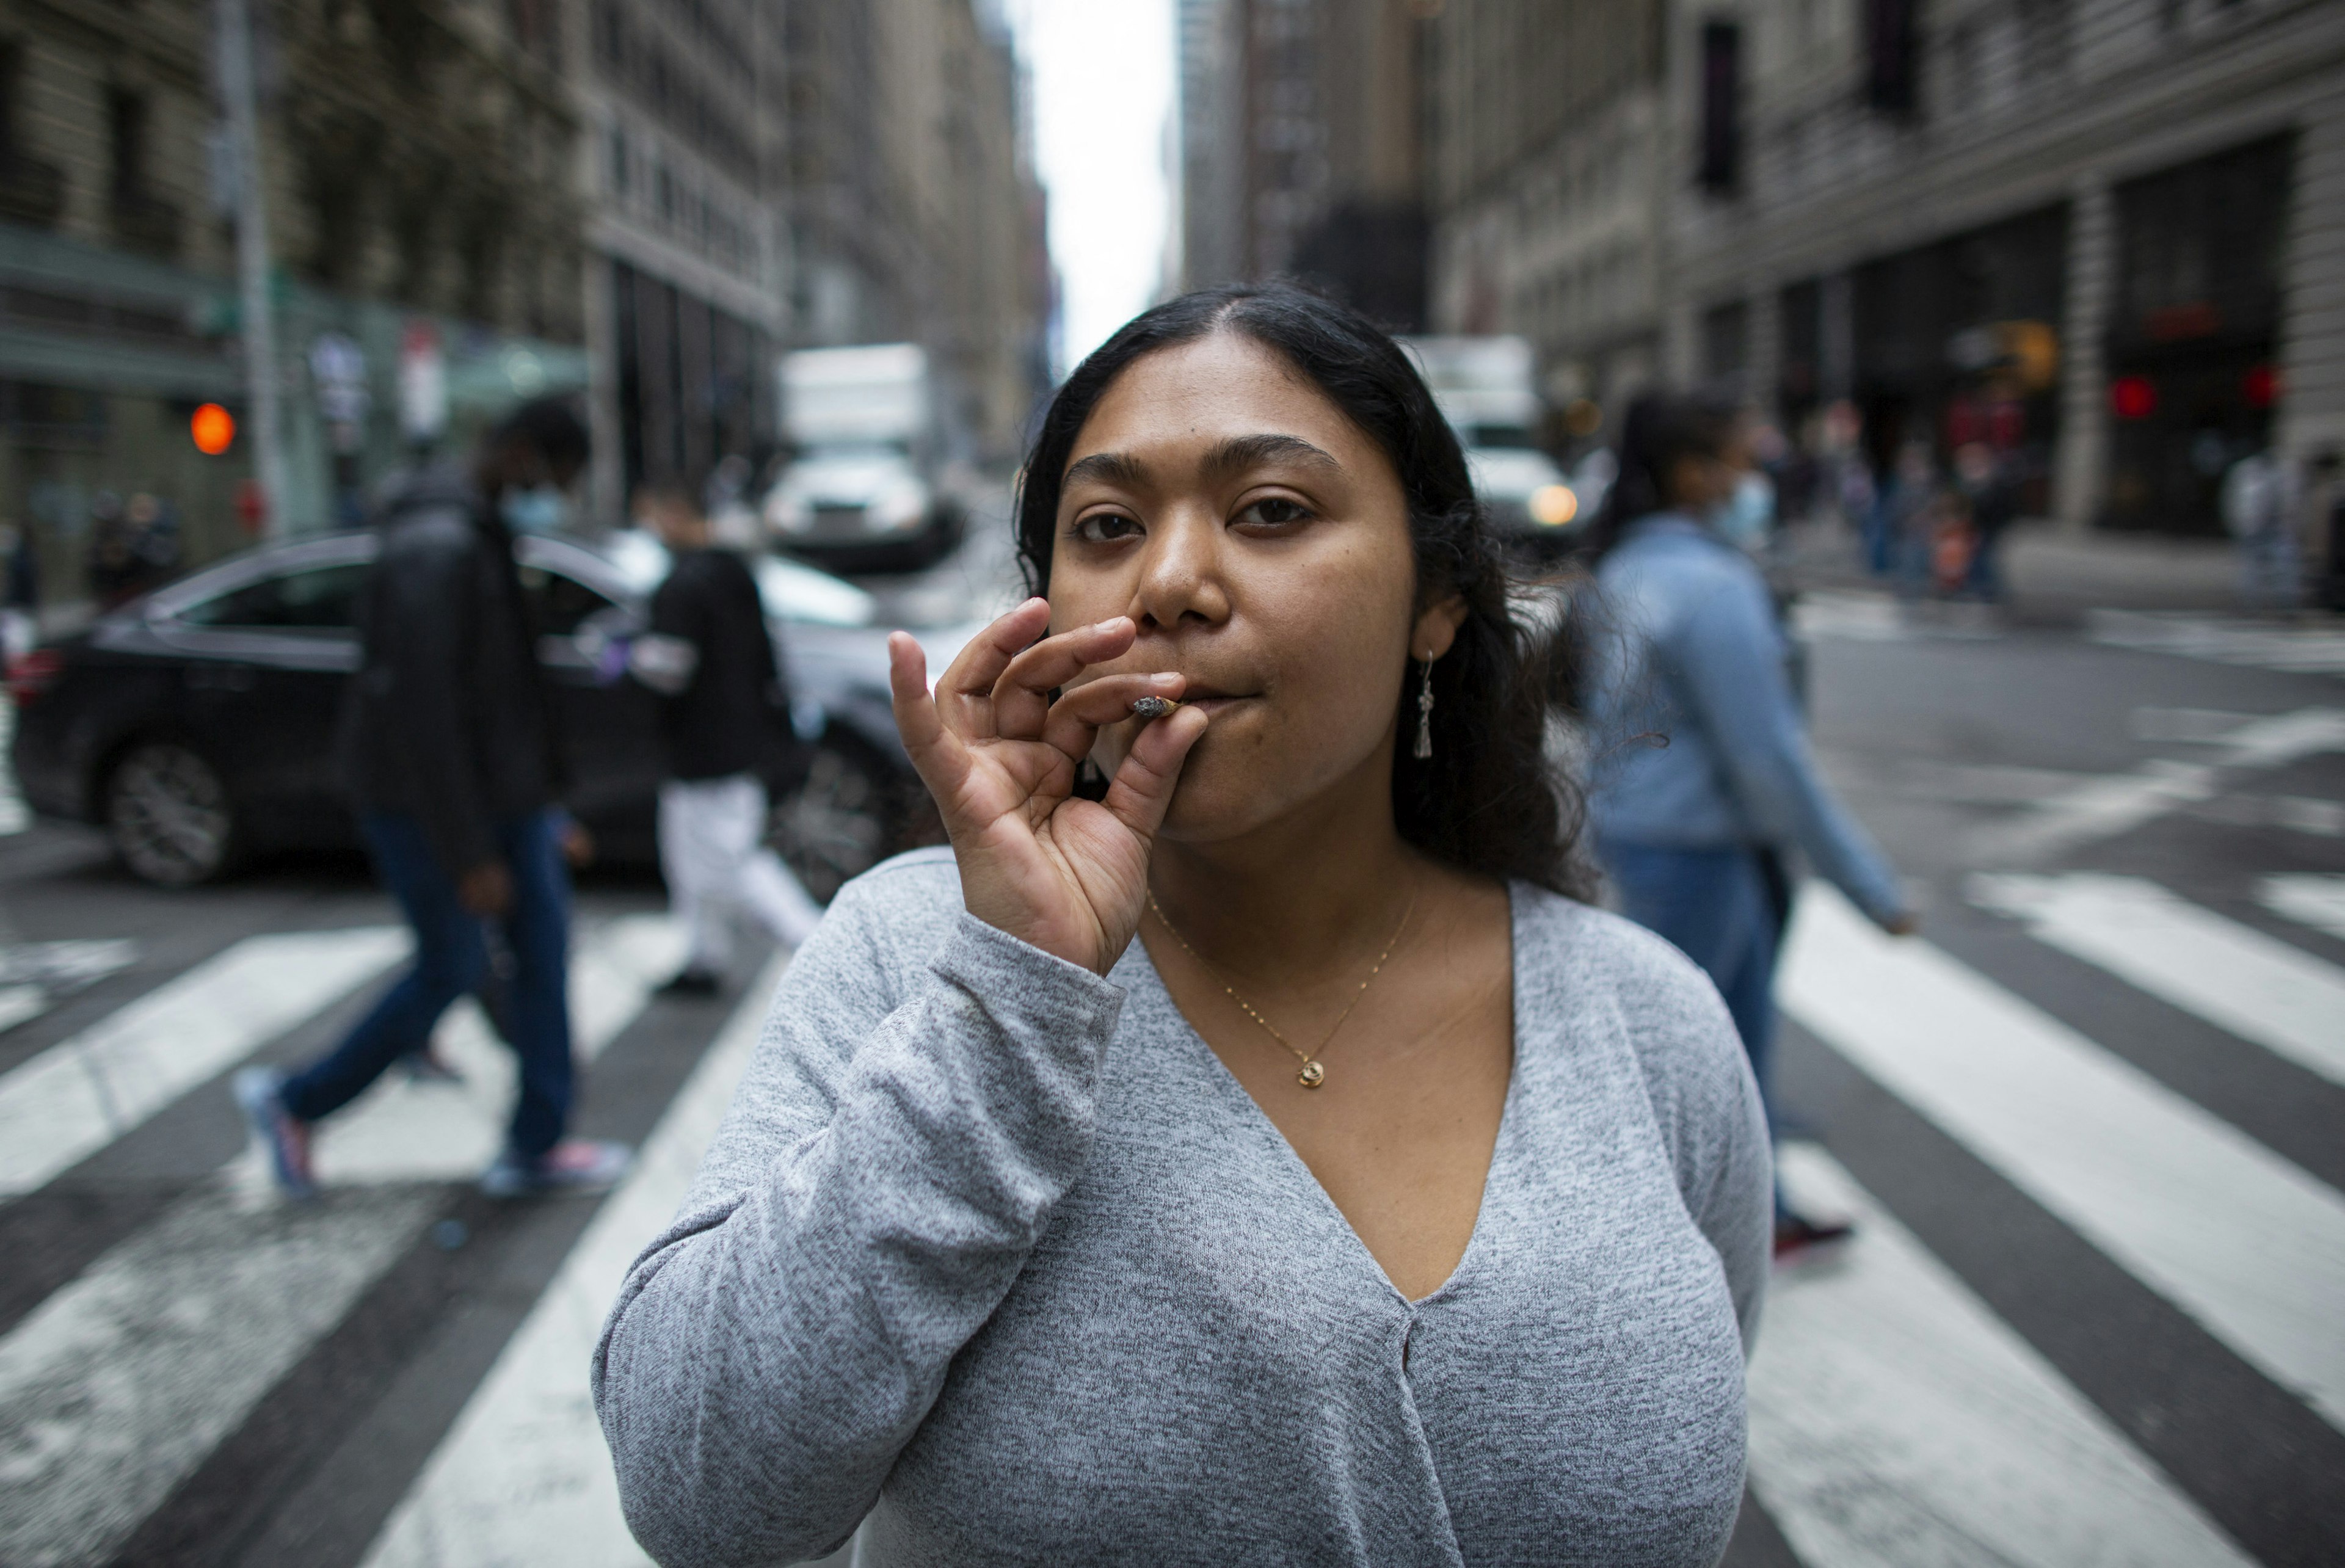 Eliana Miss Illi, General Manager of Weed World poses as she smokes a joint on 7th Avenue in Midtown New York City, March 31, 2021. - New York Governor Andrew Cuomo signed legislation legalizing recreational marijuana on March 31. 2021, with a large chunk of tax revenues from sales set to go to minority communities. New York joins 14 other US states and the District of Columbia in permitting cannabis after lawmakers in both state chambers, where Cuomo's Democratic Party holds strong majorities, backed the bill on March 30. (Photo by Kena Betancur / AFP) (Photo by KENA BETANCUR/AFP via Getty Images)